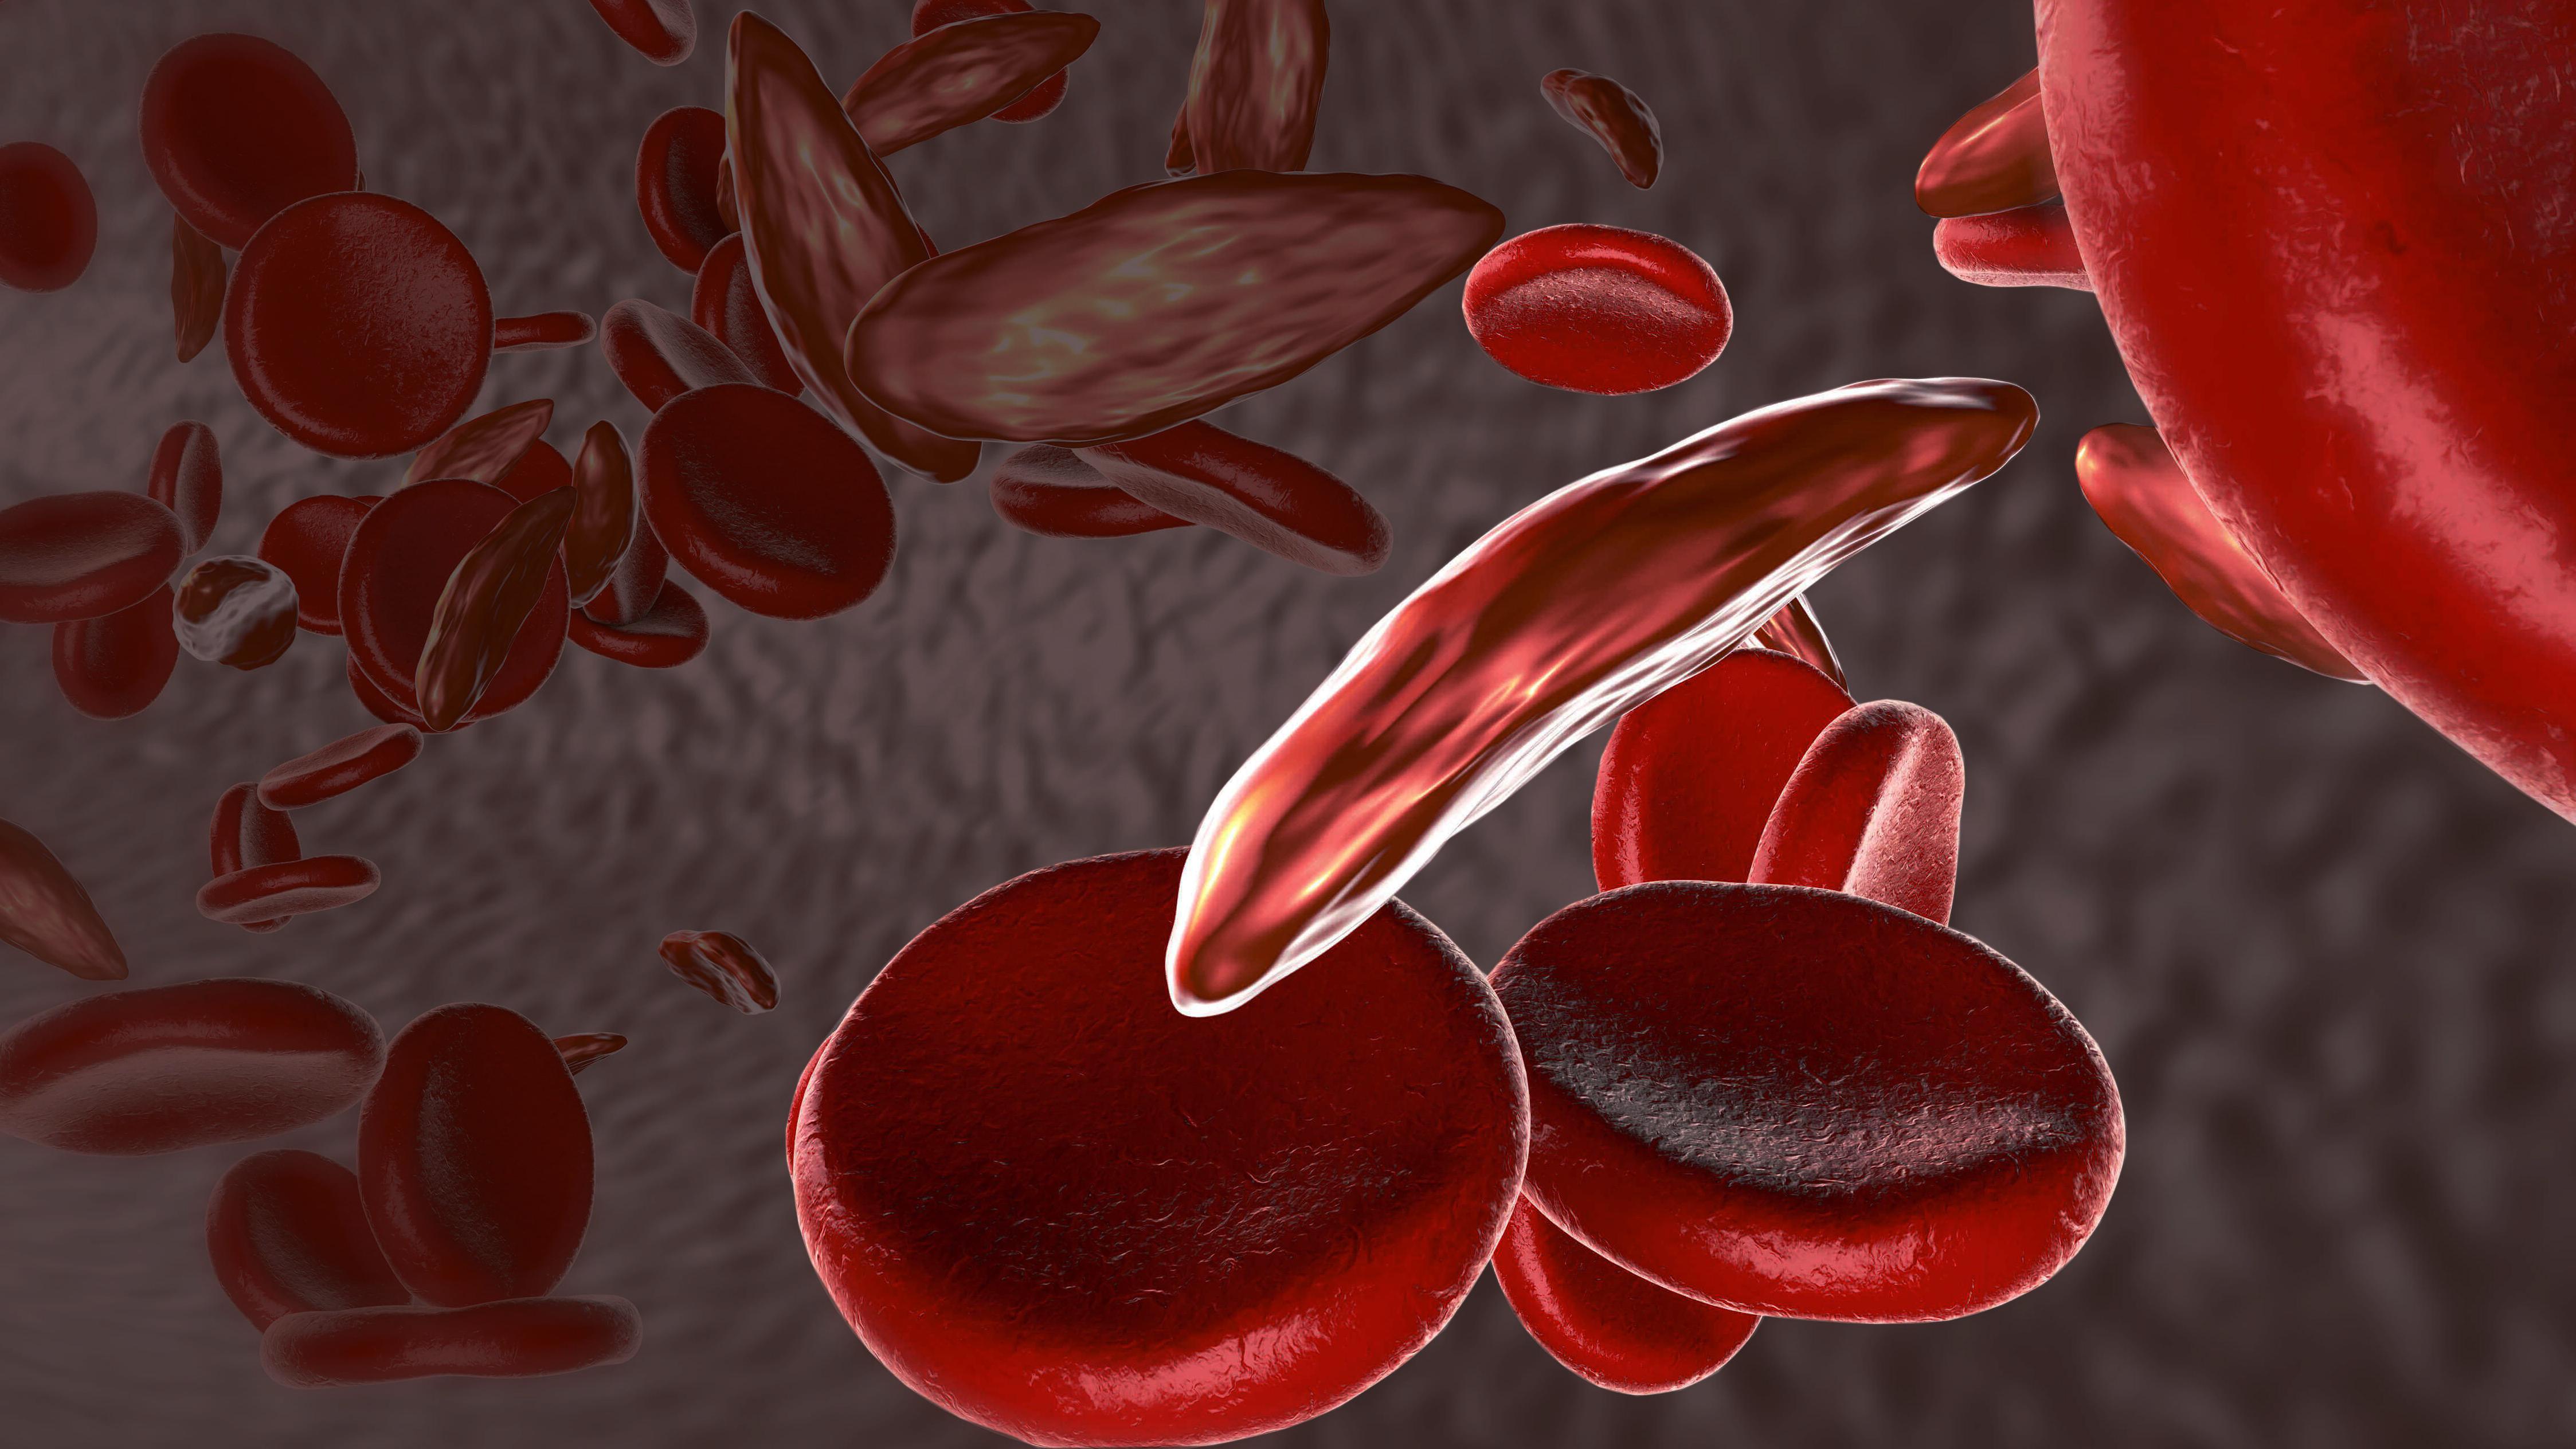 3D Rendering of Sickle Cells and normal cells